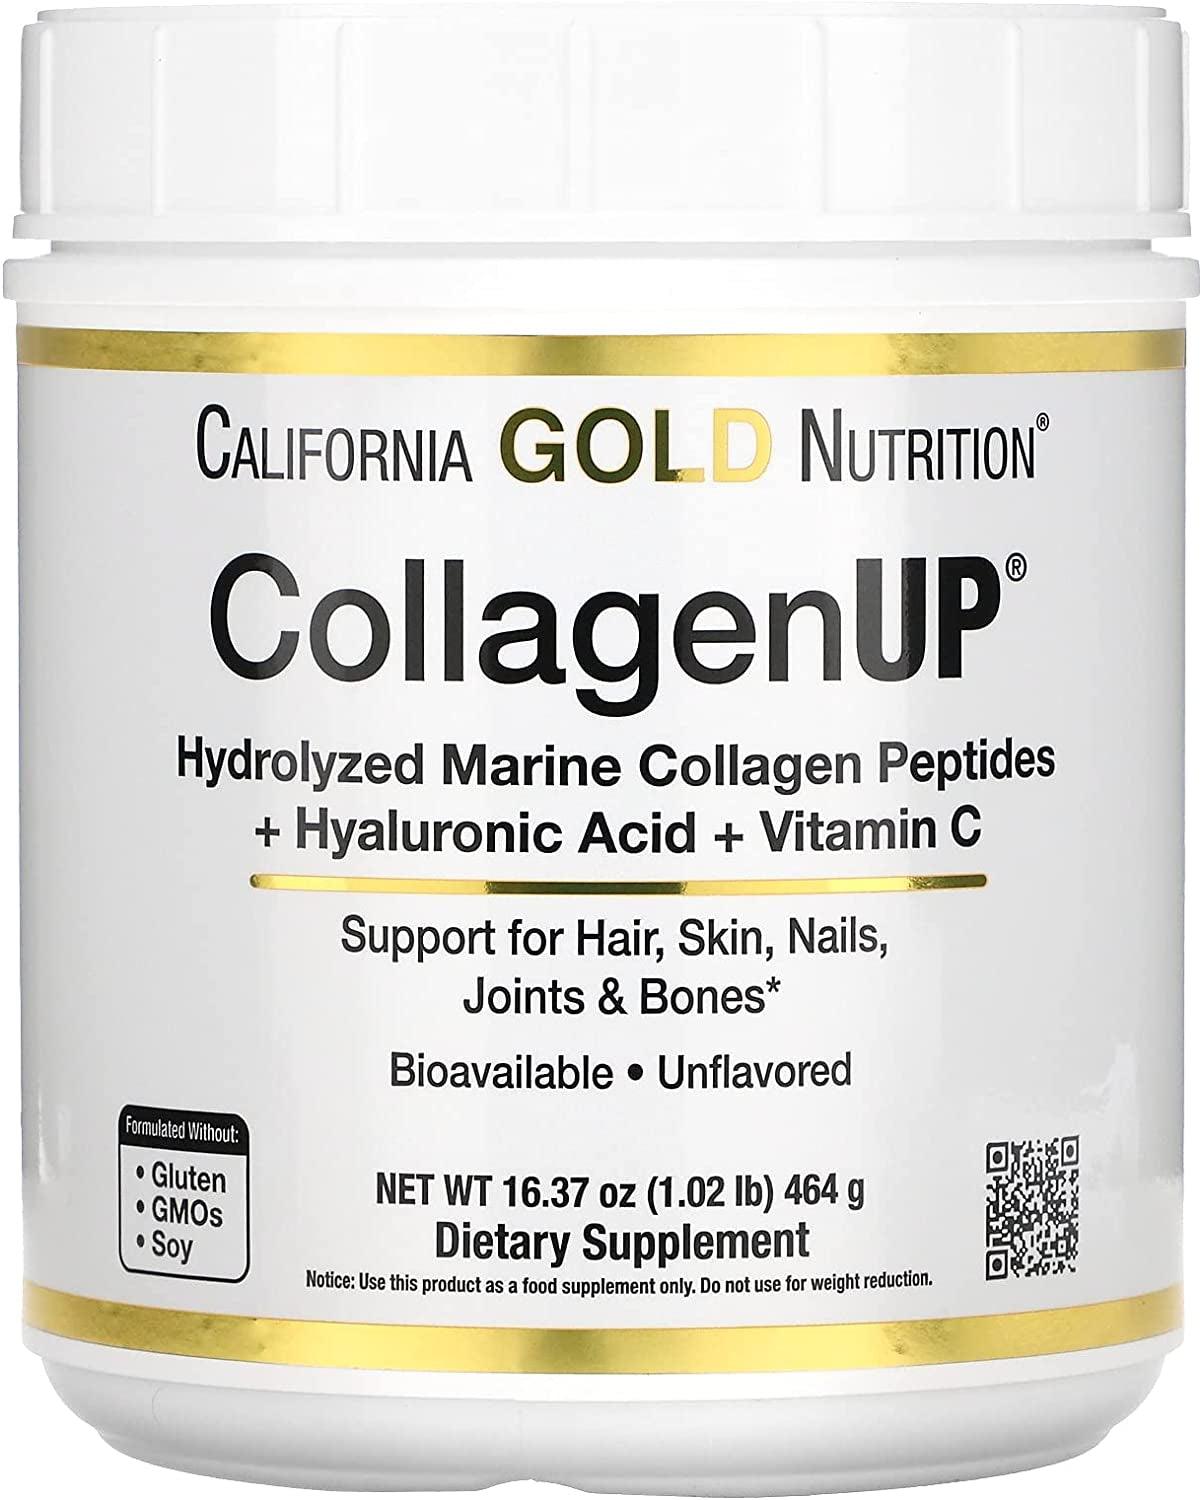 Collagen Peptides Powder with Hyaluronic Acid, Support for Healthy Hair, Skin, Nails, Joints and Bones, Non-Gmo, Gluten and Dairy Free, Unflavored, 16.37 Oz (464 G)